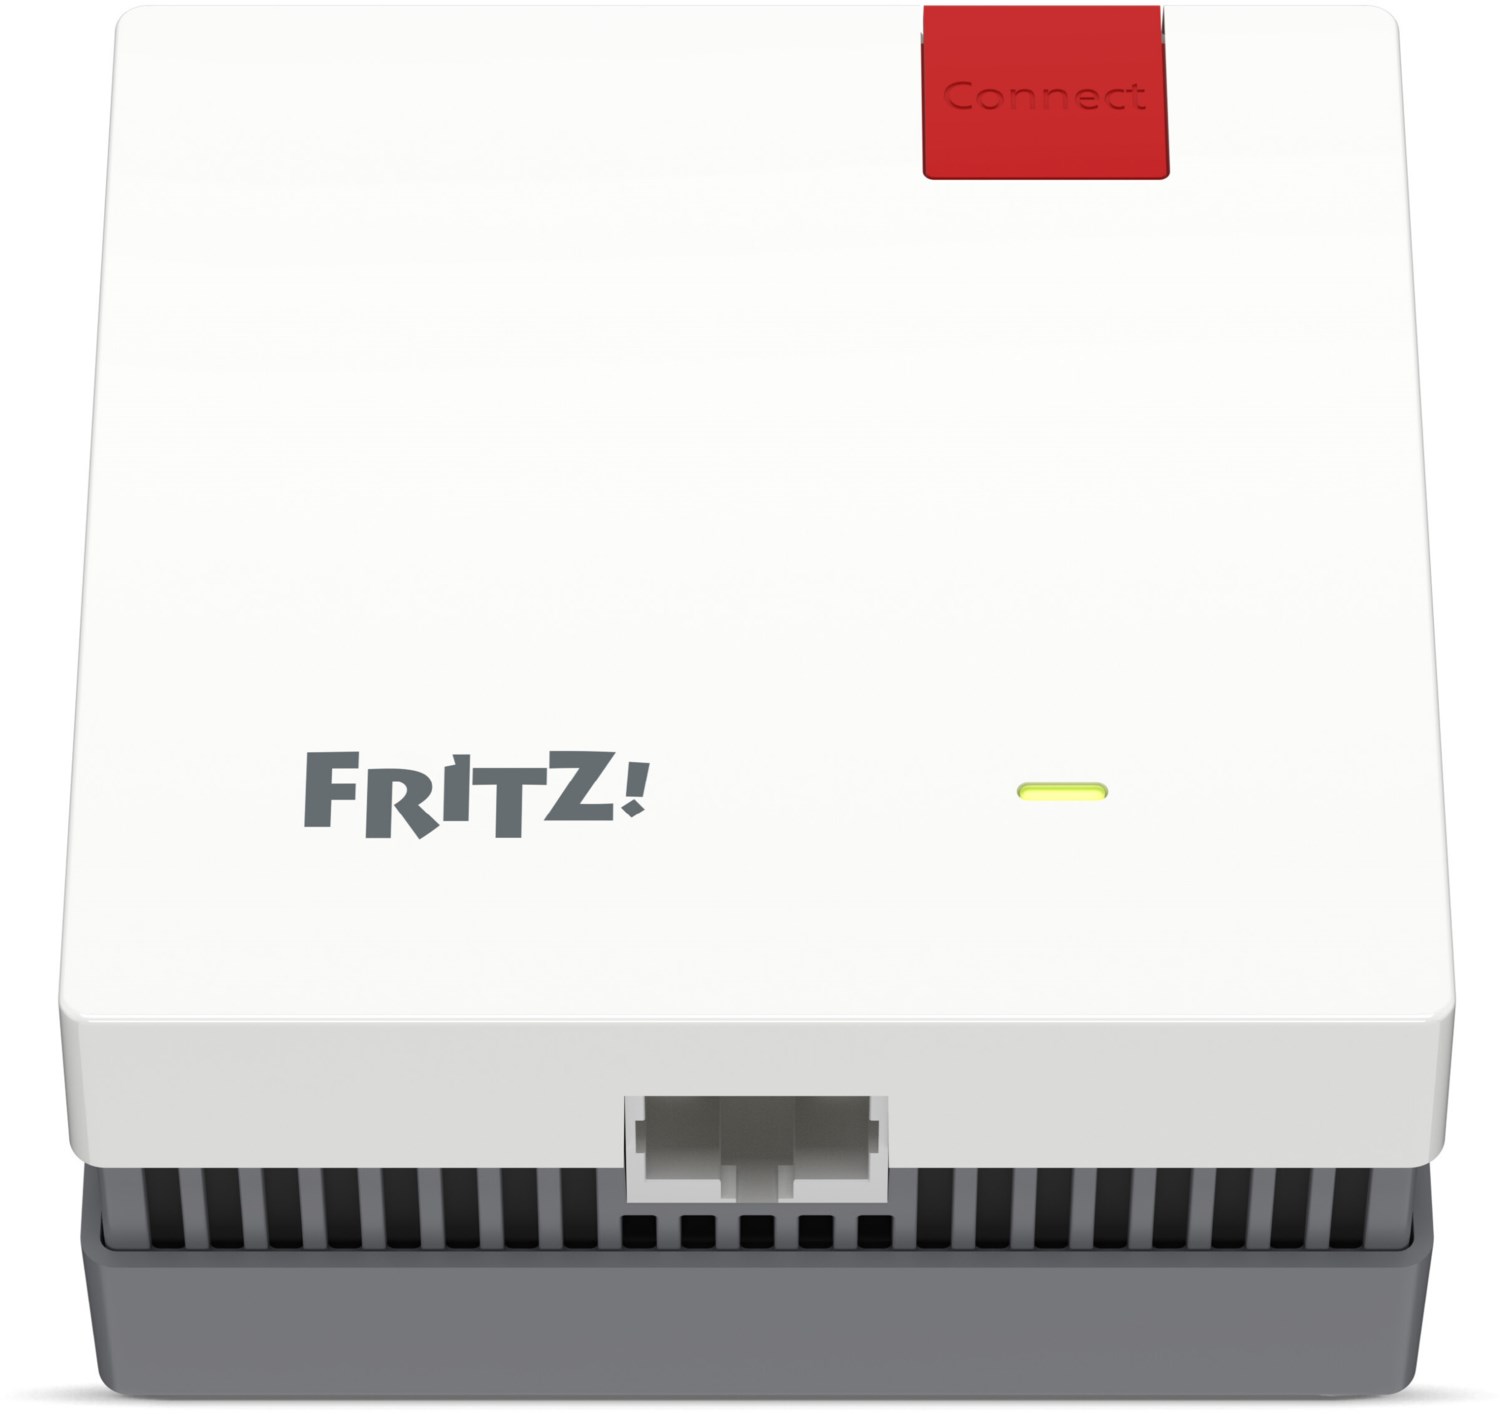 FRITZ!Repeater 1200 AX WLAN Repeater von AVM